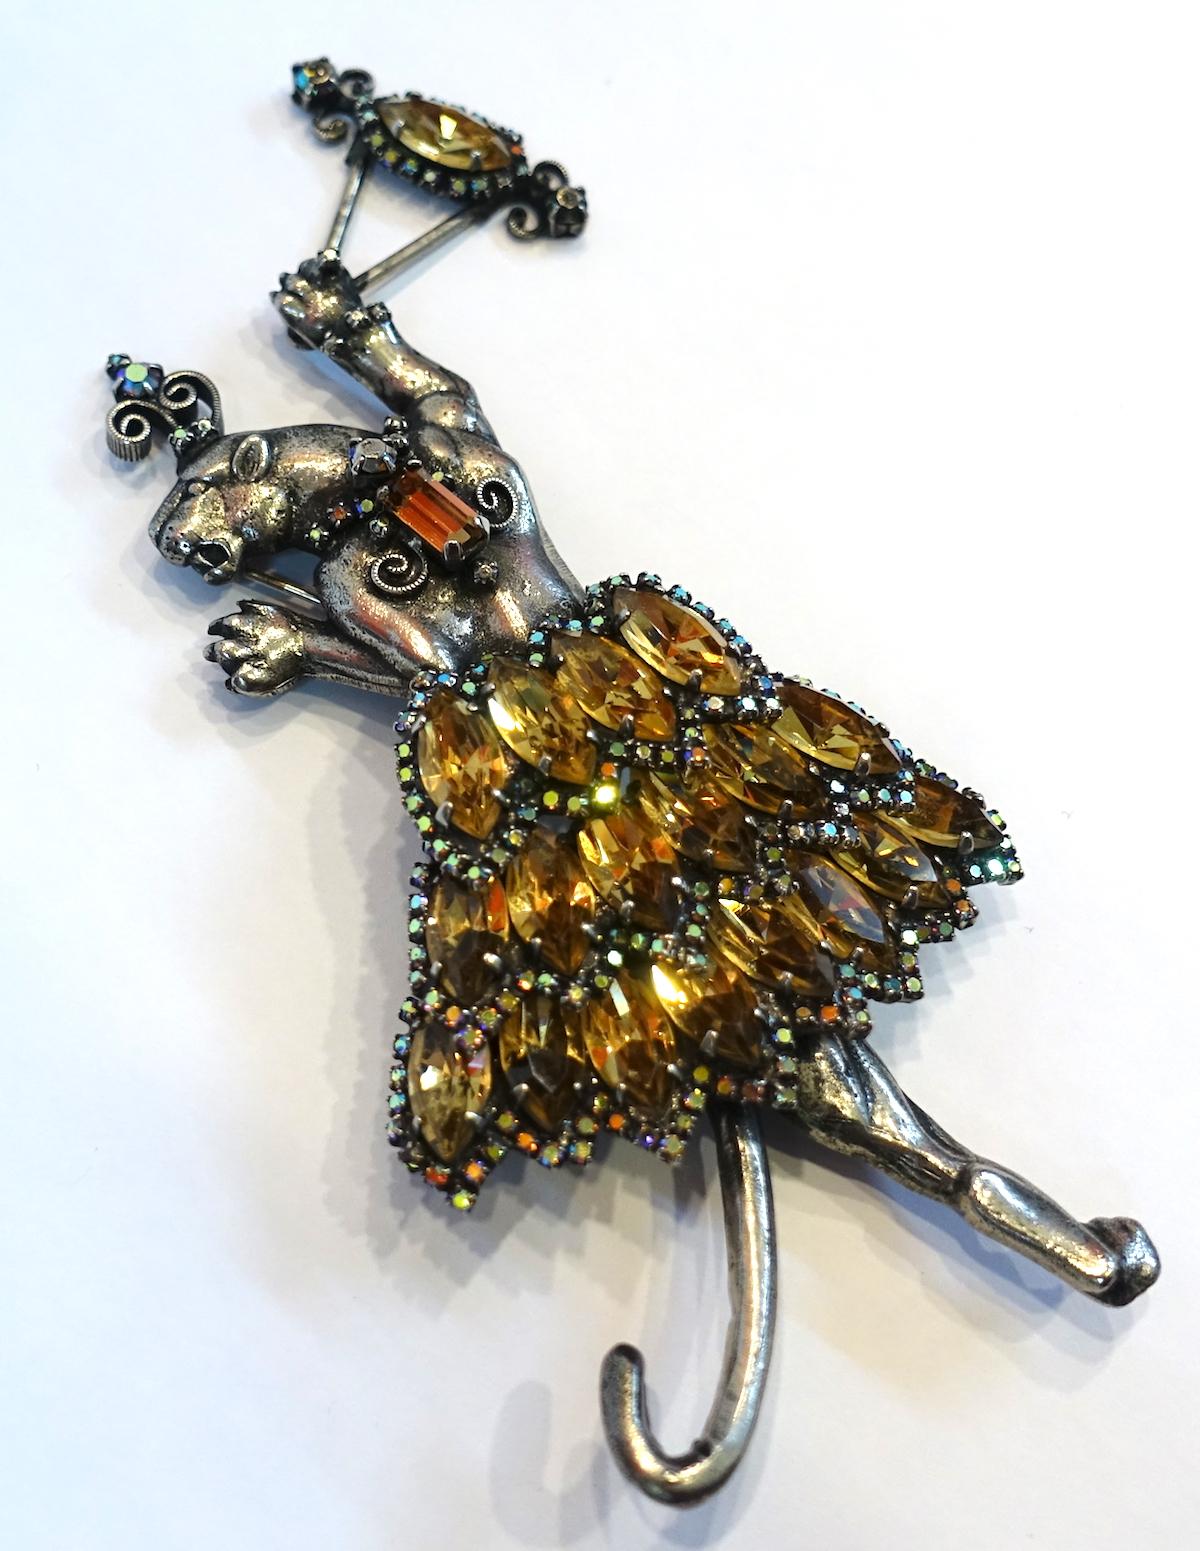 This unique, huge brooch is designed by Danny Pollak.  We believe this is a dancing tiger with citrine skirt and clear crystals made in a sterling silver.  This brooch measures 6” x 2-1/2” and is signed “Pollak”.  It is in excellent condition.